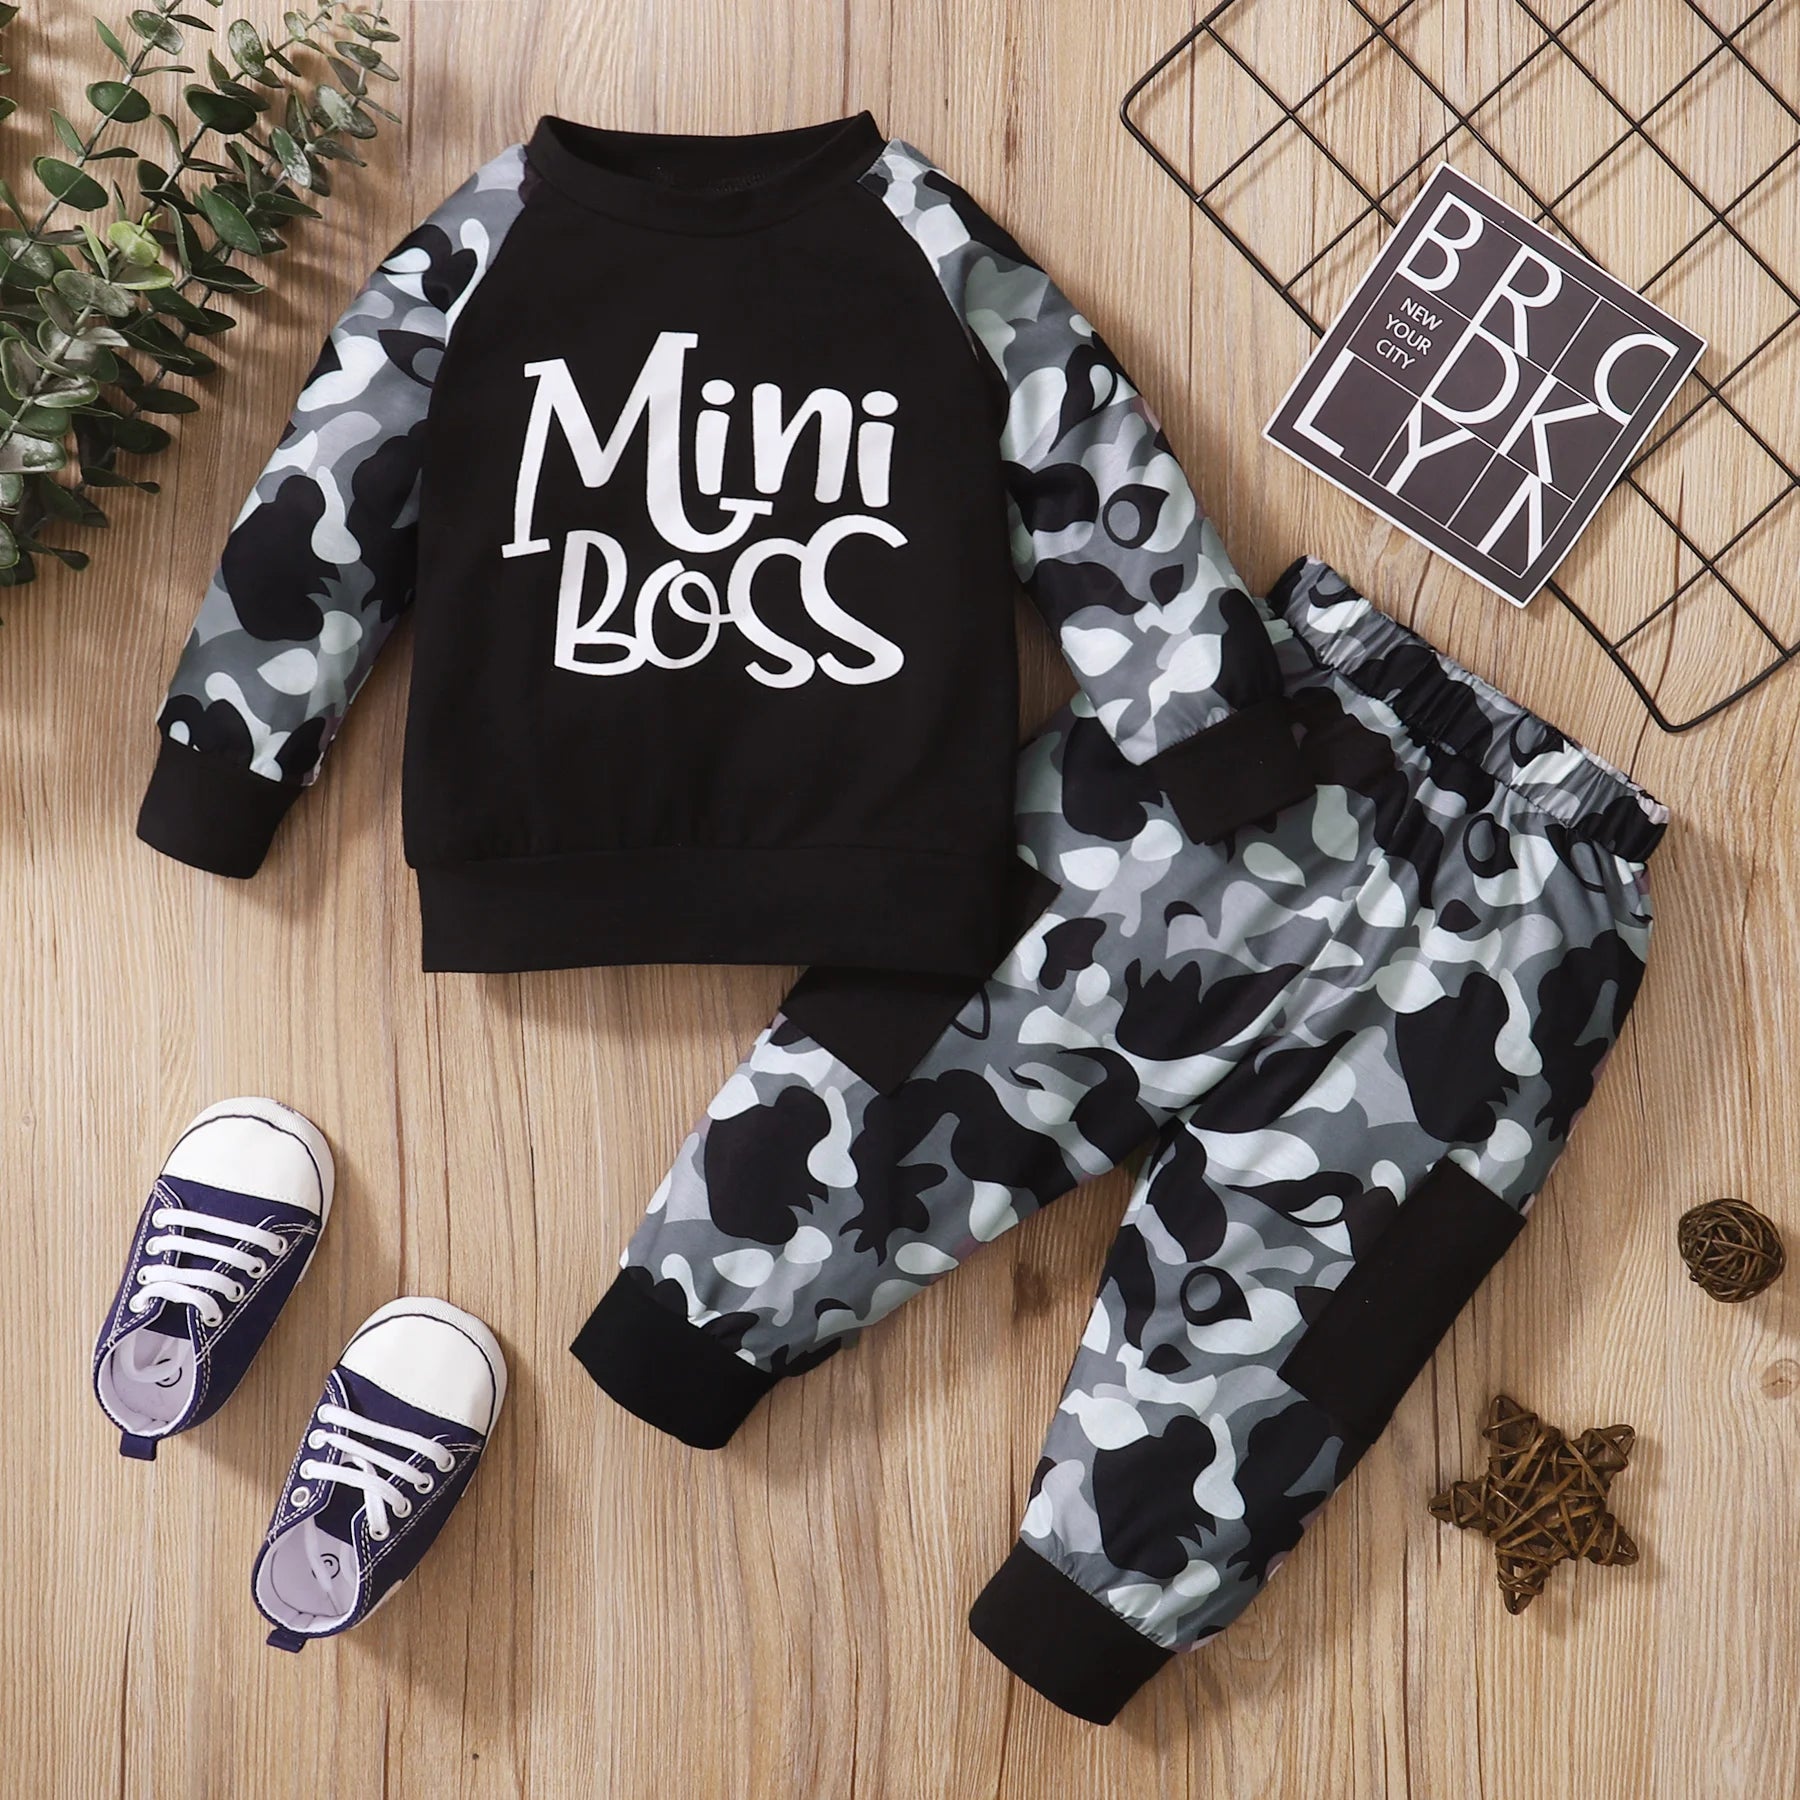 Toddler   Baby   Boy  Sweatshirt   Outfits     Camouflage    Camouflage   Long    Sleeve    Tops    Pants    2pcs   Fall   Winte